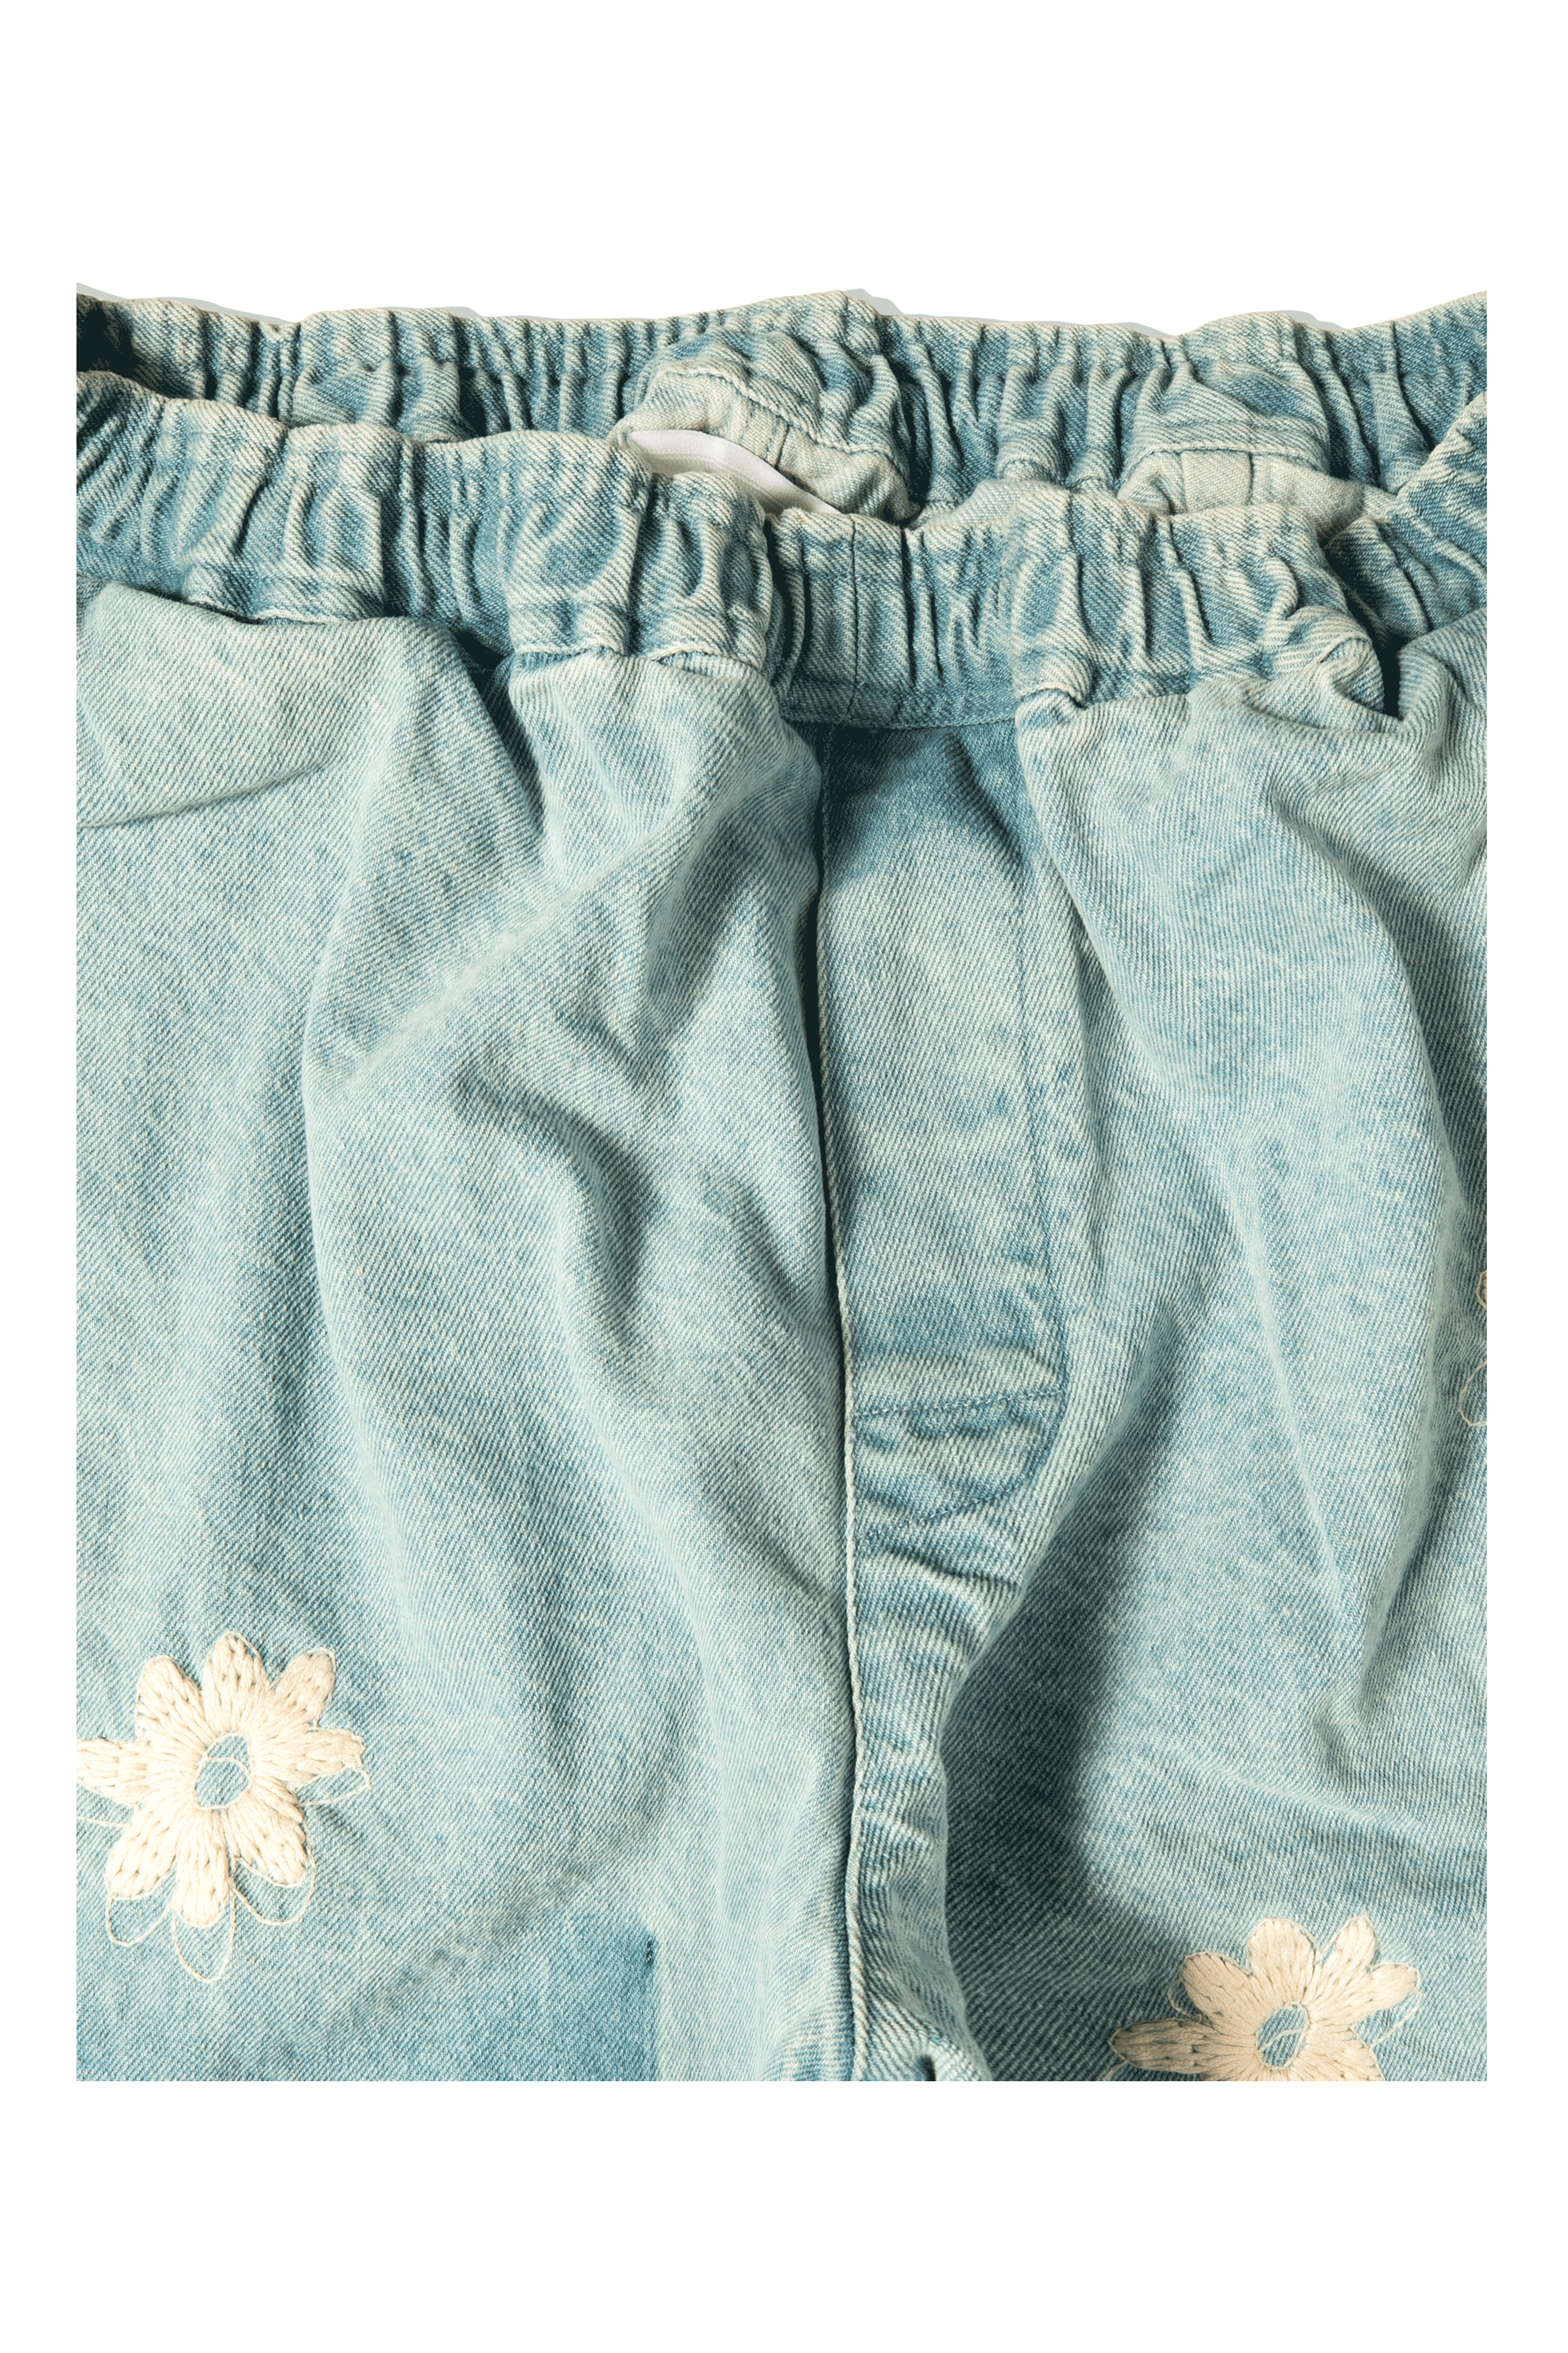 Flower Hand Embroidery Pants